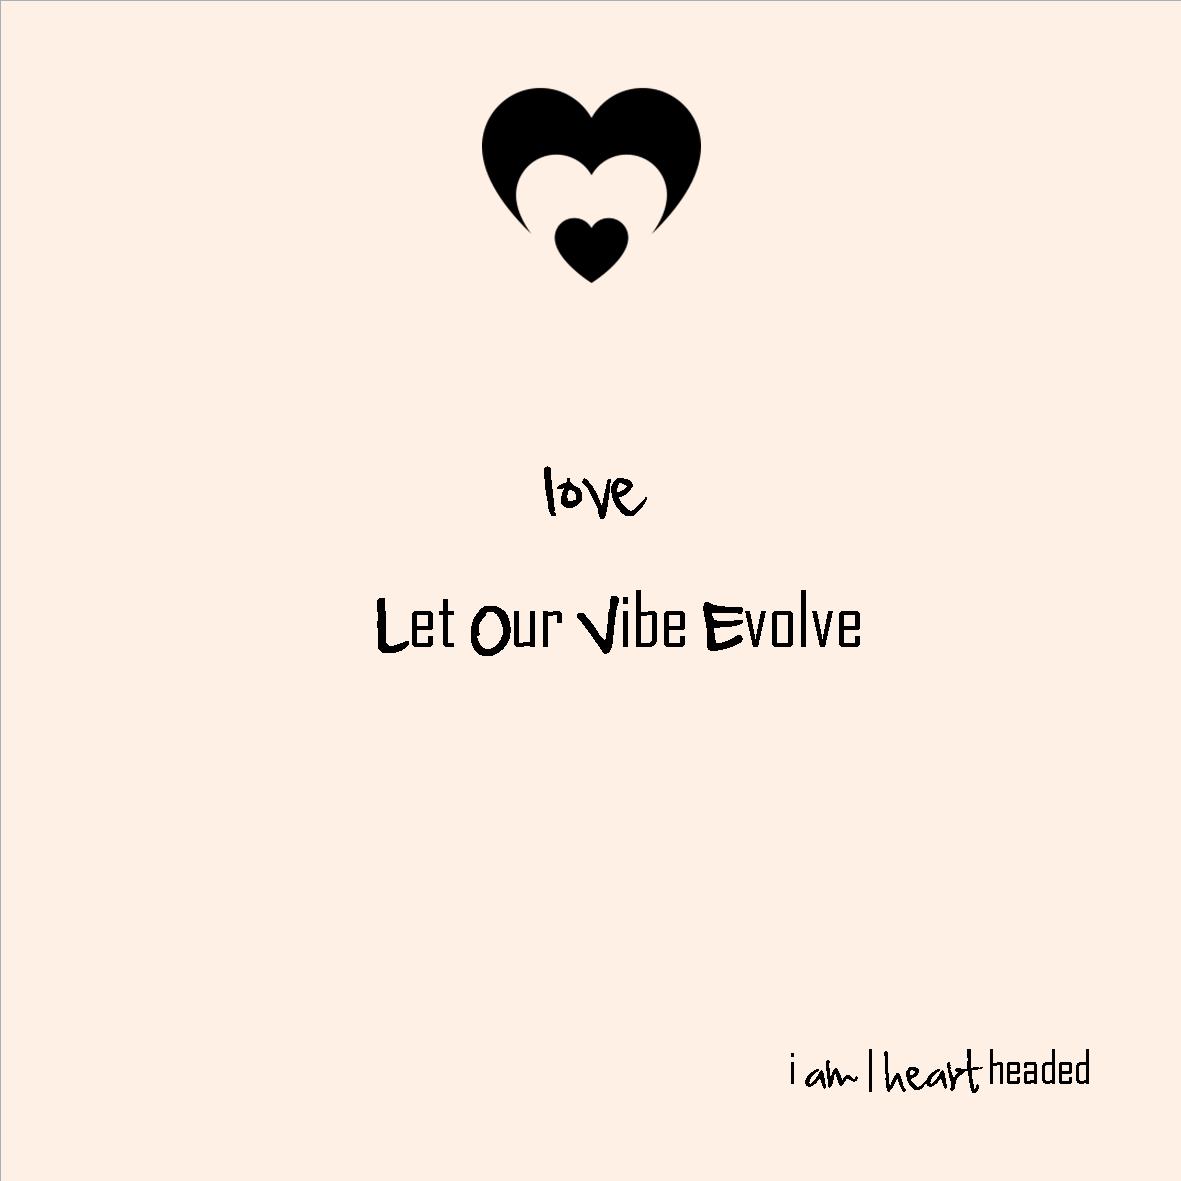 full-size featured image of quote 'let our vibe evolve' in category 'sparkly' at i am | heart headed